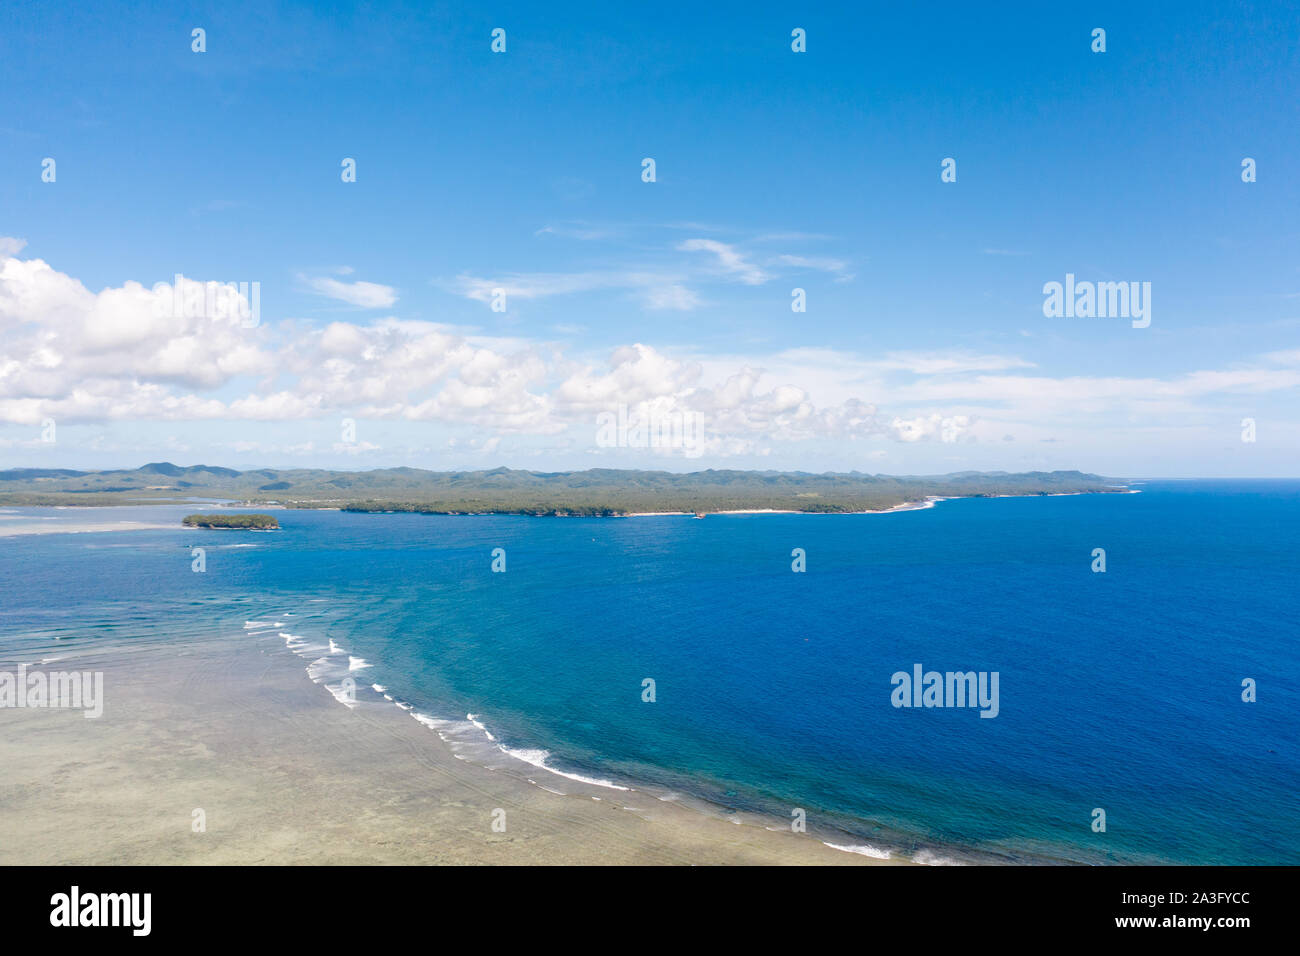 Seascape, coast of the island of Siargao, Philippines. Blue sea with waves and sky with big clouds, top view. Stock Photo